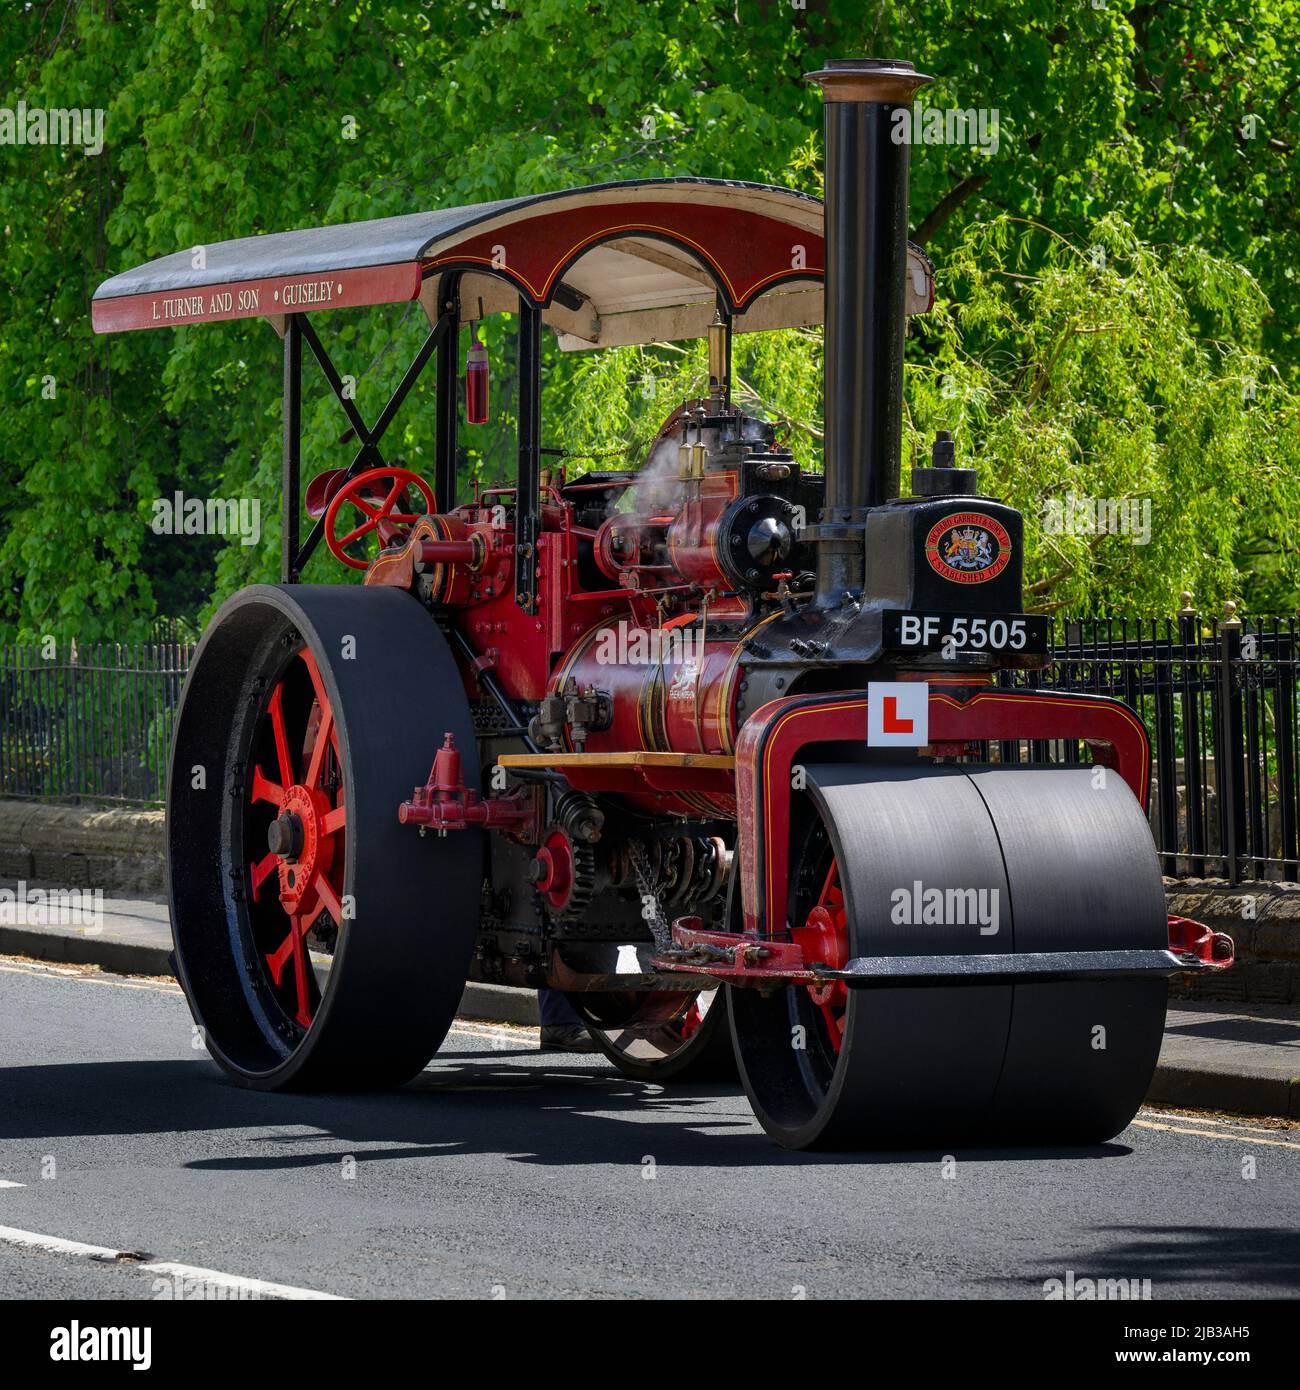 Red black stationary heavy steam-powered vehicle parked at roadside (L-plate & reg number on front) - Burley-in-Wharfedale, West Yorkshire England UK. Stock Photo